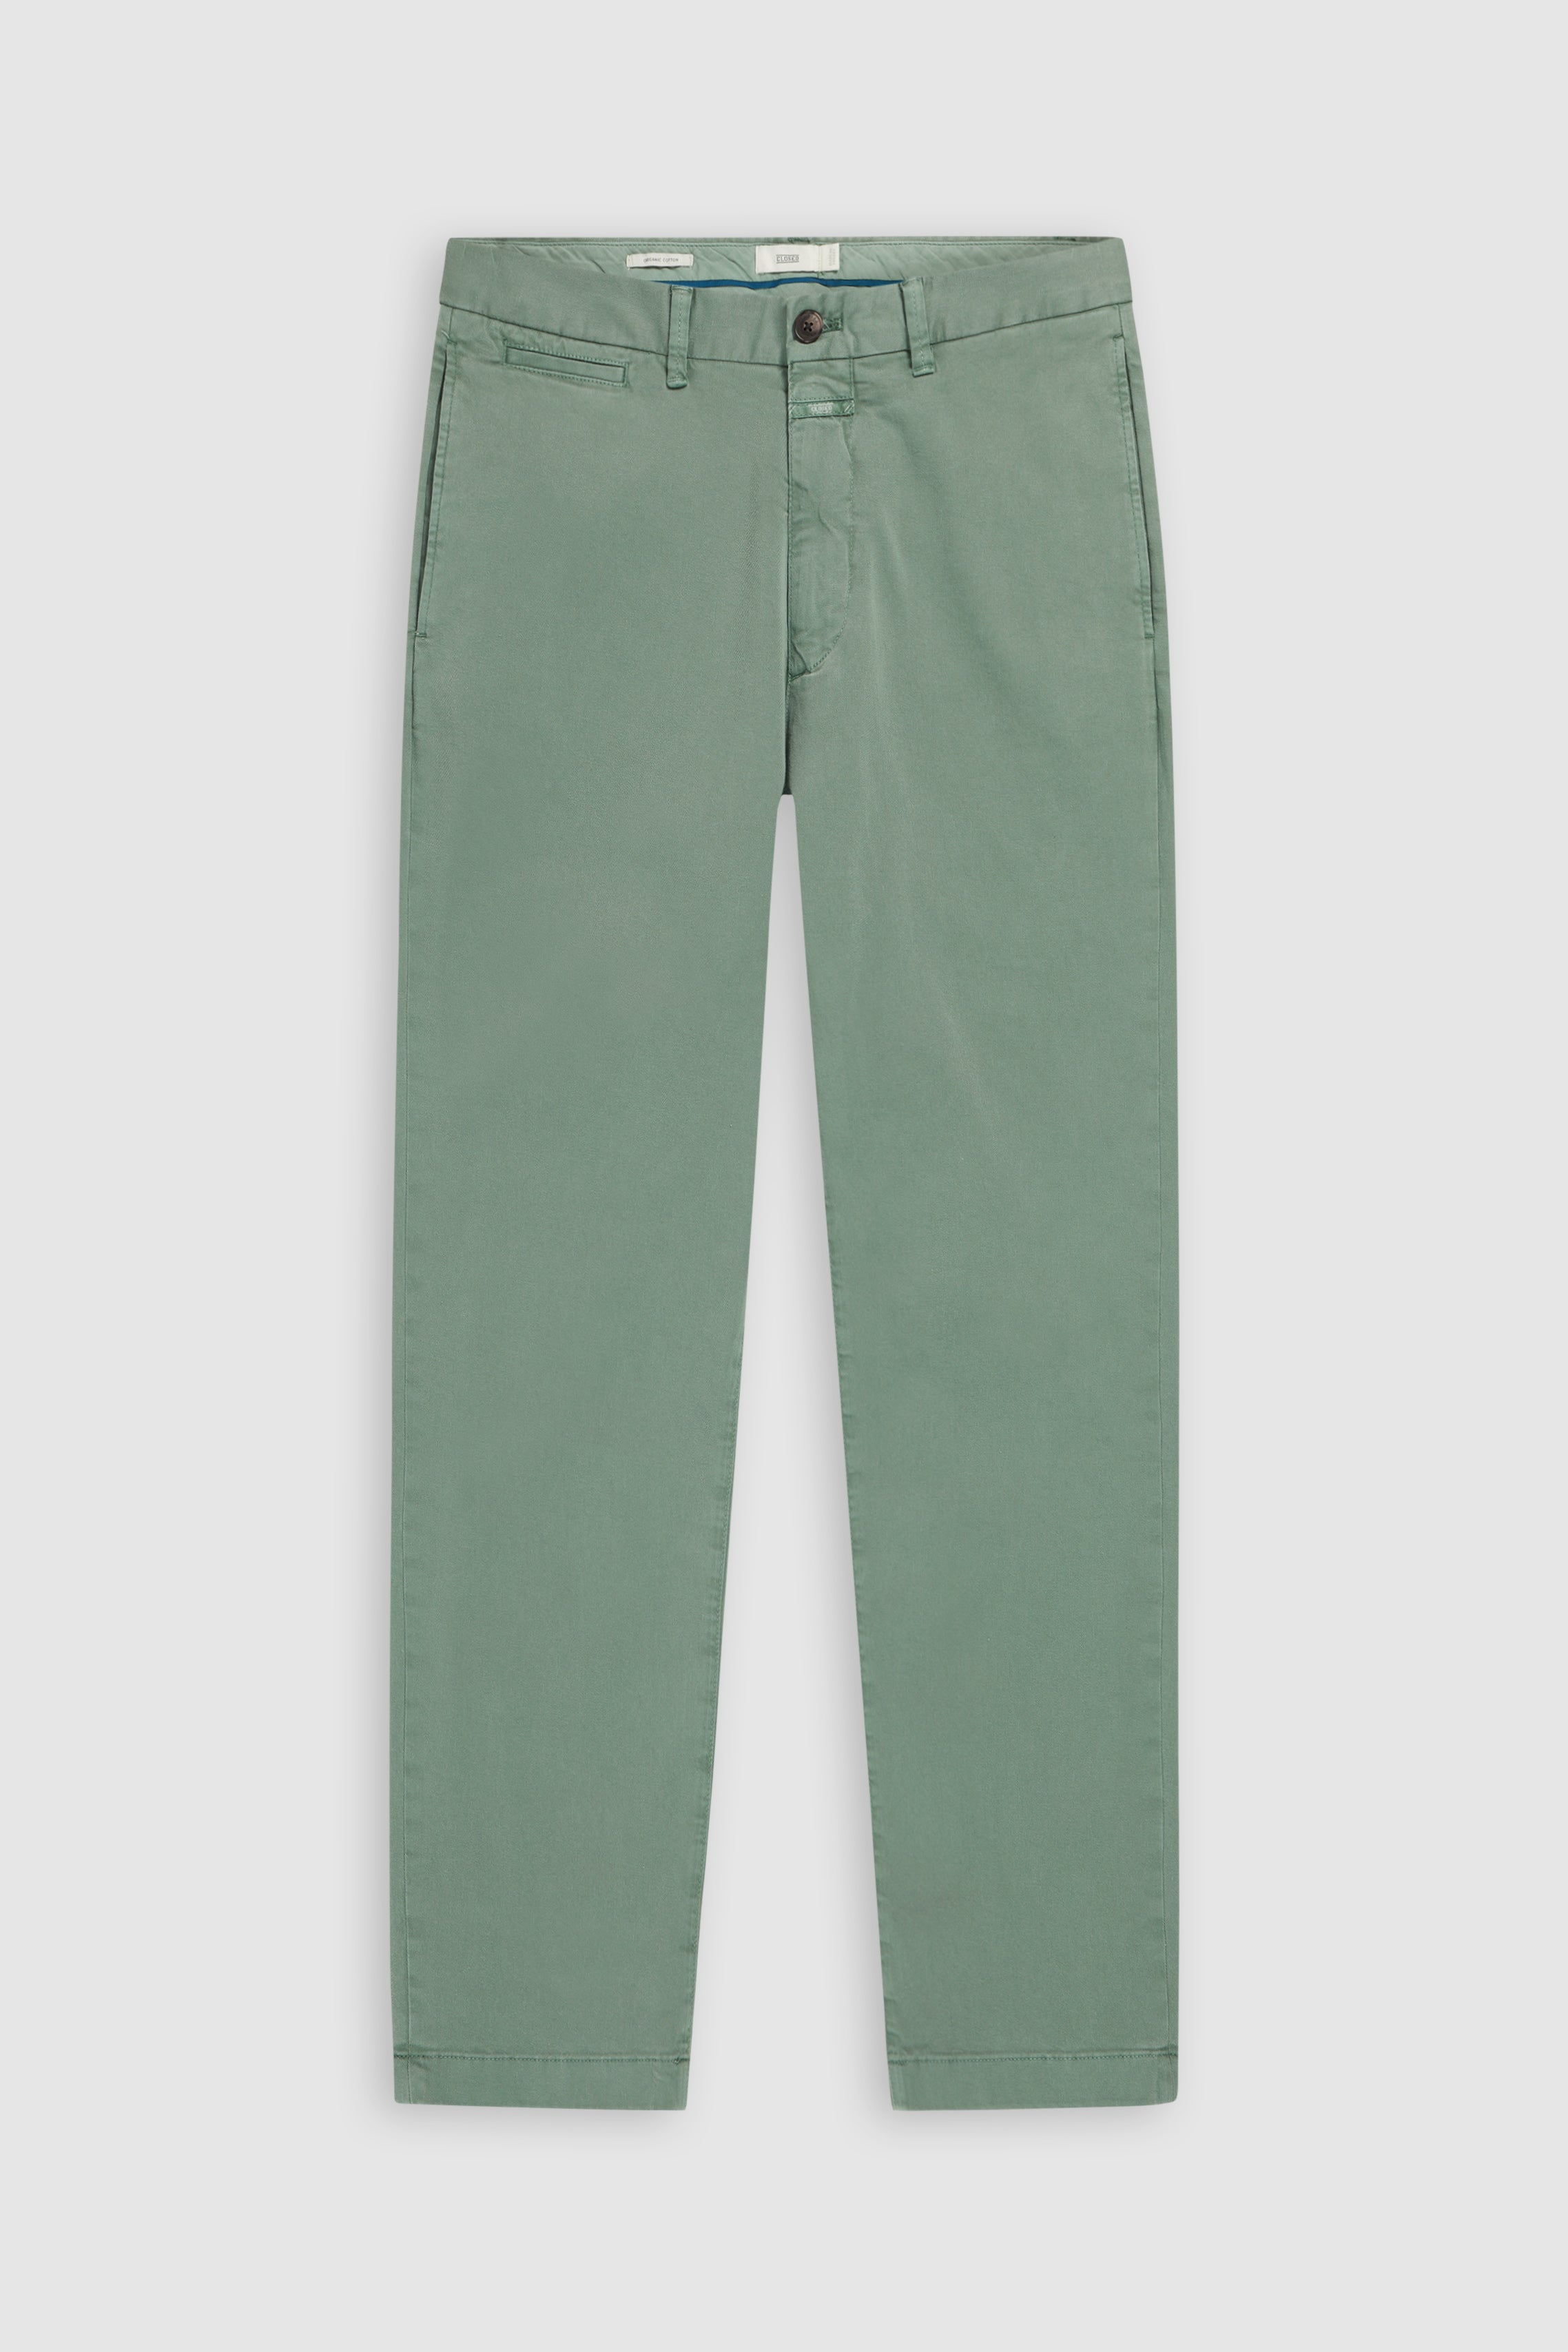 CLOSED-OUTLET-SALE-STYLE-NAME-TACOMA-TAPERED-PANTS-Hosen-ARCHIVE-COLLECTION-4_6767f989-c515-4de0-bf0f-9cf1762e7c59.jpg